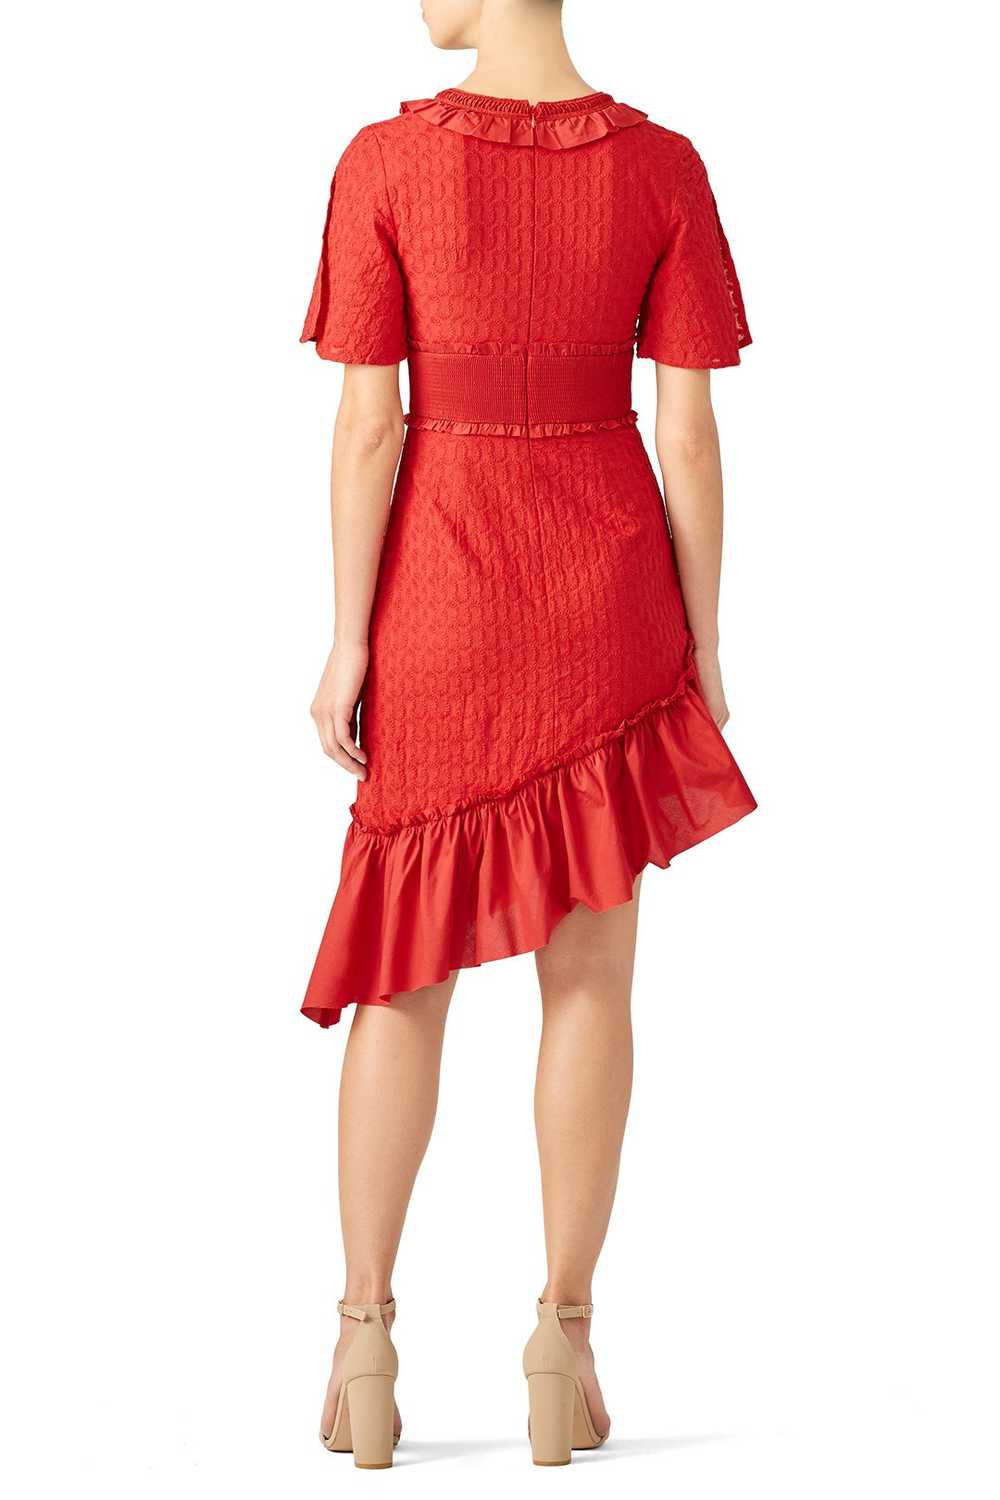 FINDERS KEEPERS Red Memento Dress - image 2